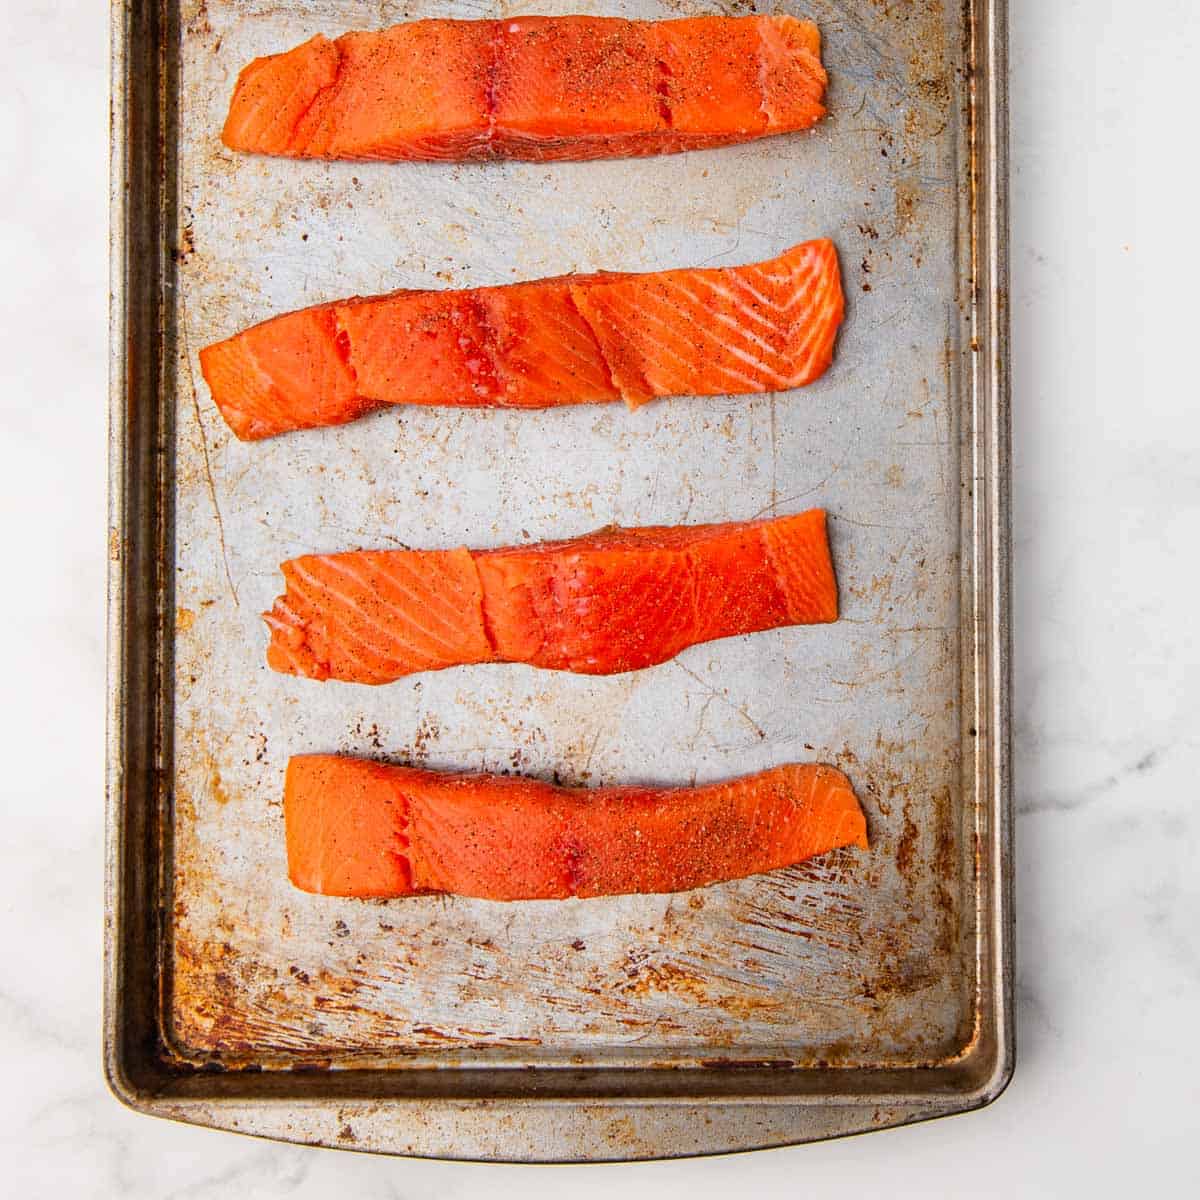 raw salmon fillets seasoned with salt and pepper on a baking sheet